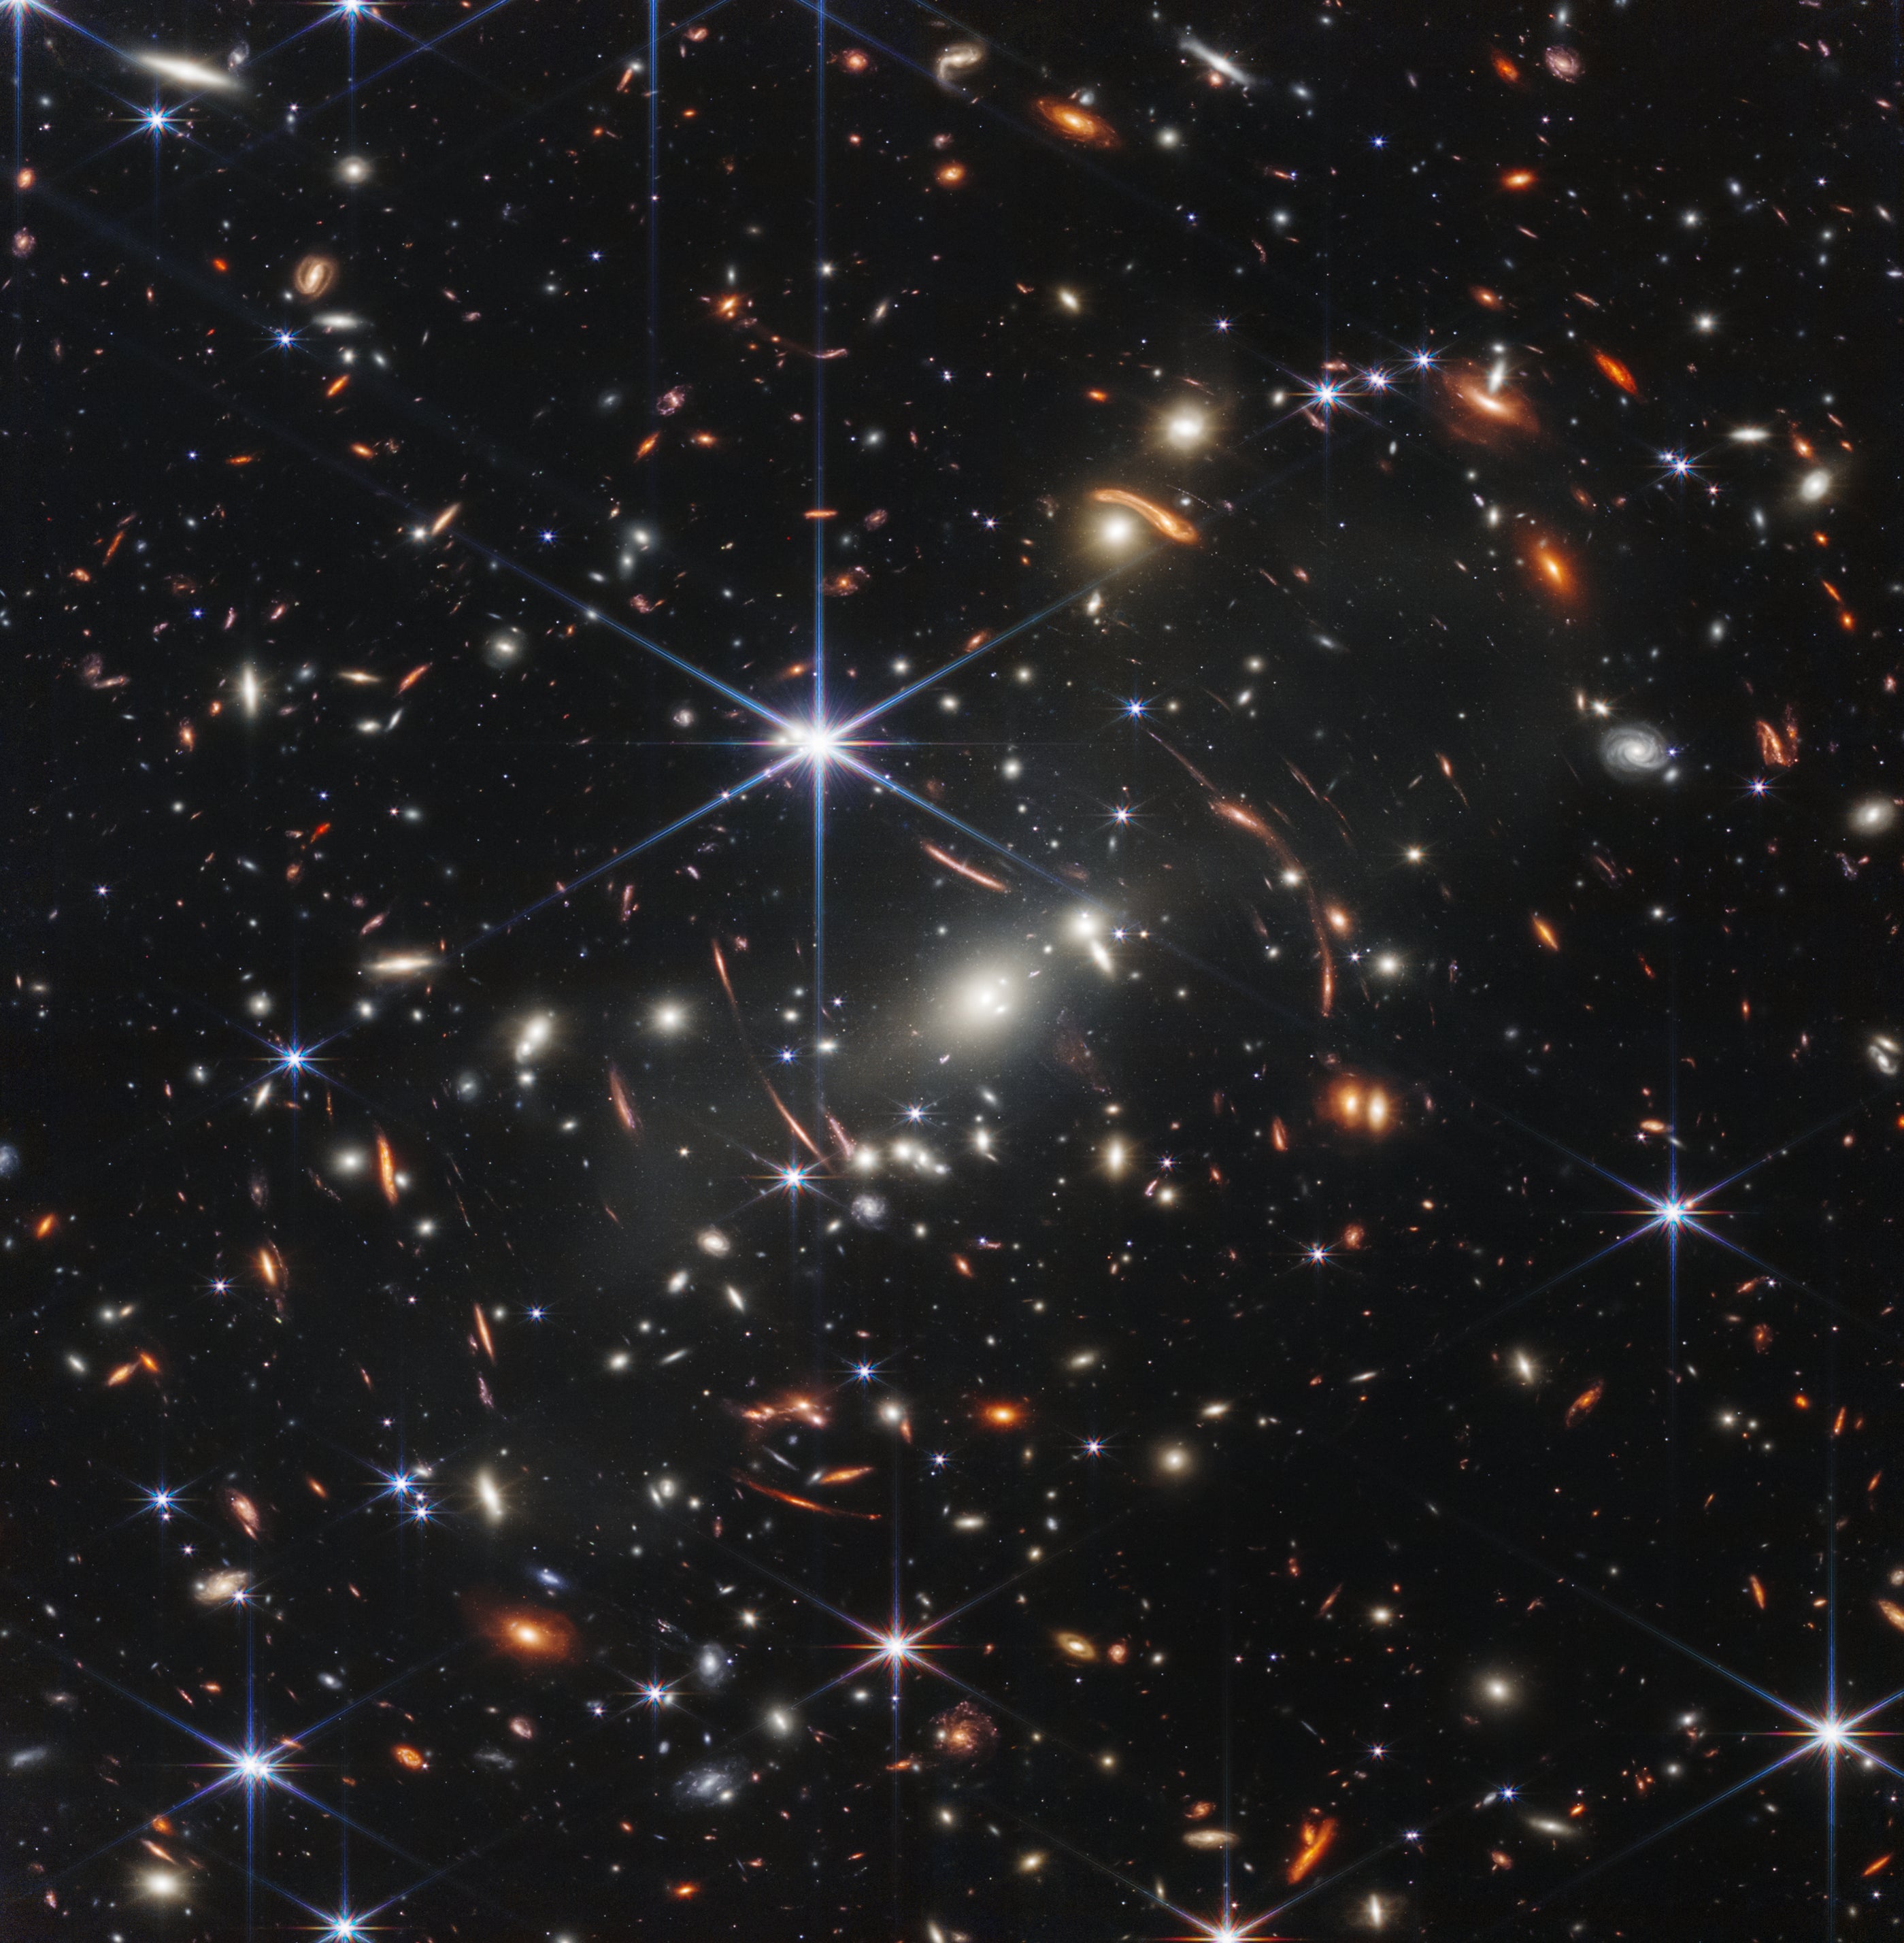 Hubble Views a Star-Studded Cosmic Cloud - NASA Science